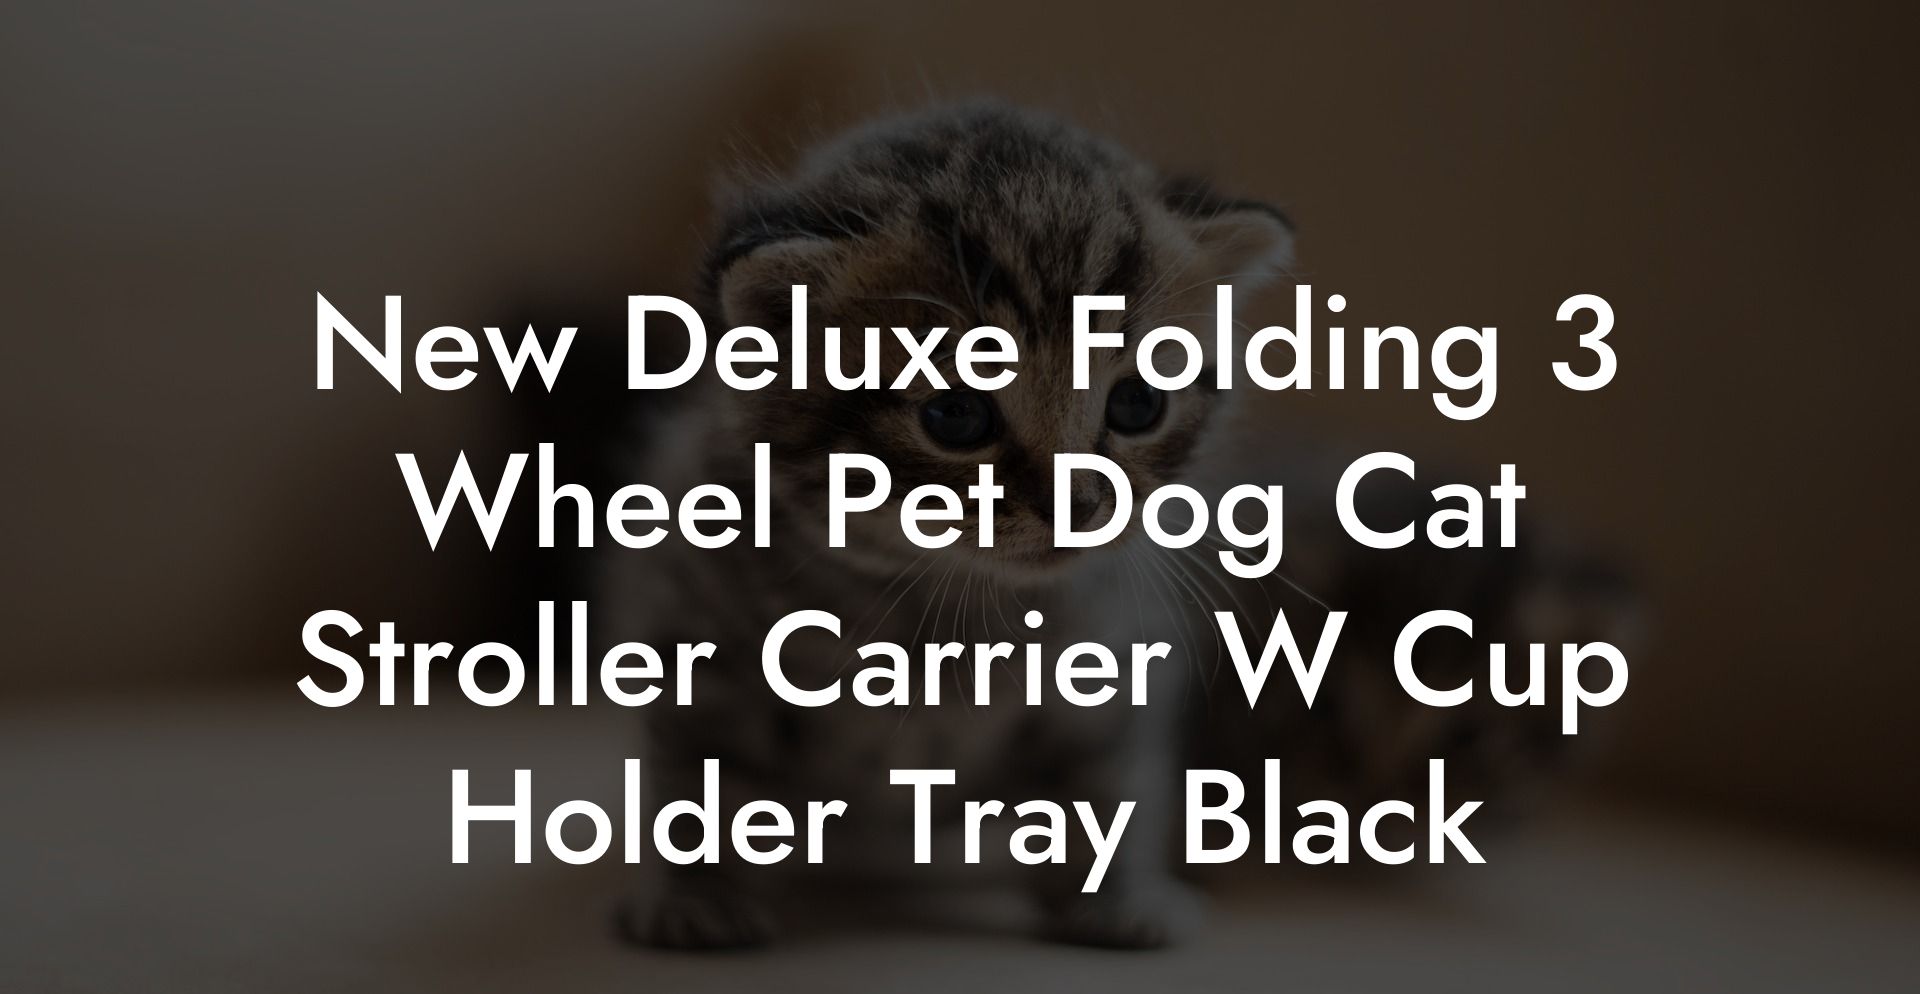 New Deluxe Folding 3 Wheel Pet Dog Cat Stroller Carrier W Cup Holder Tray Black